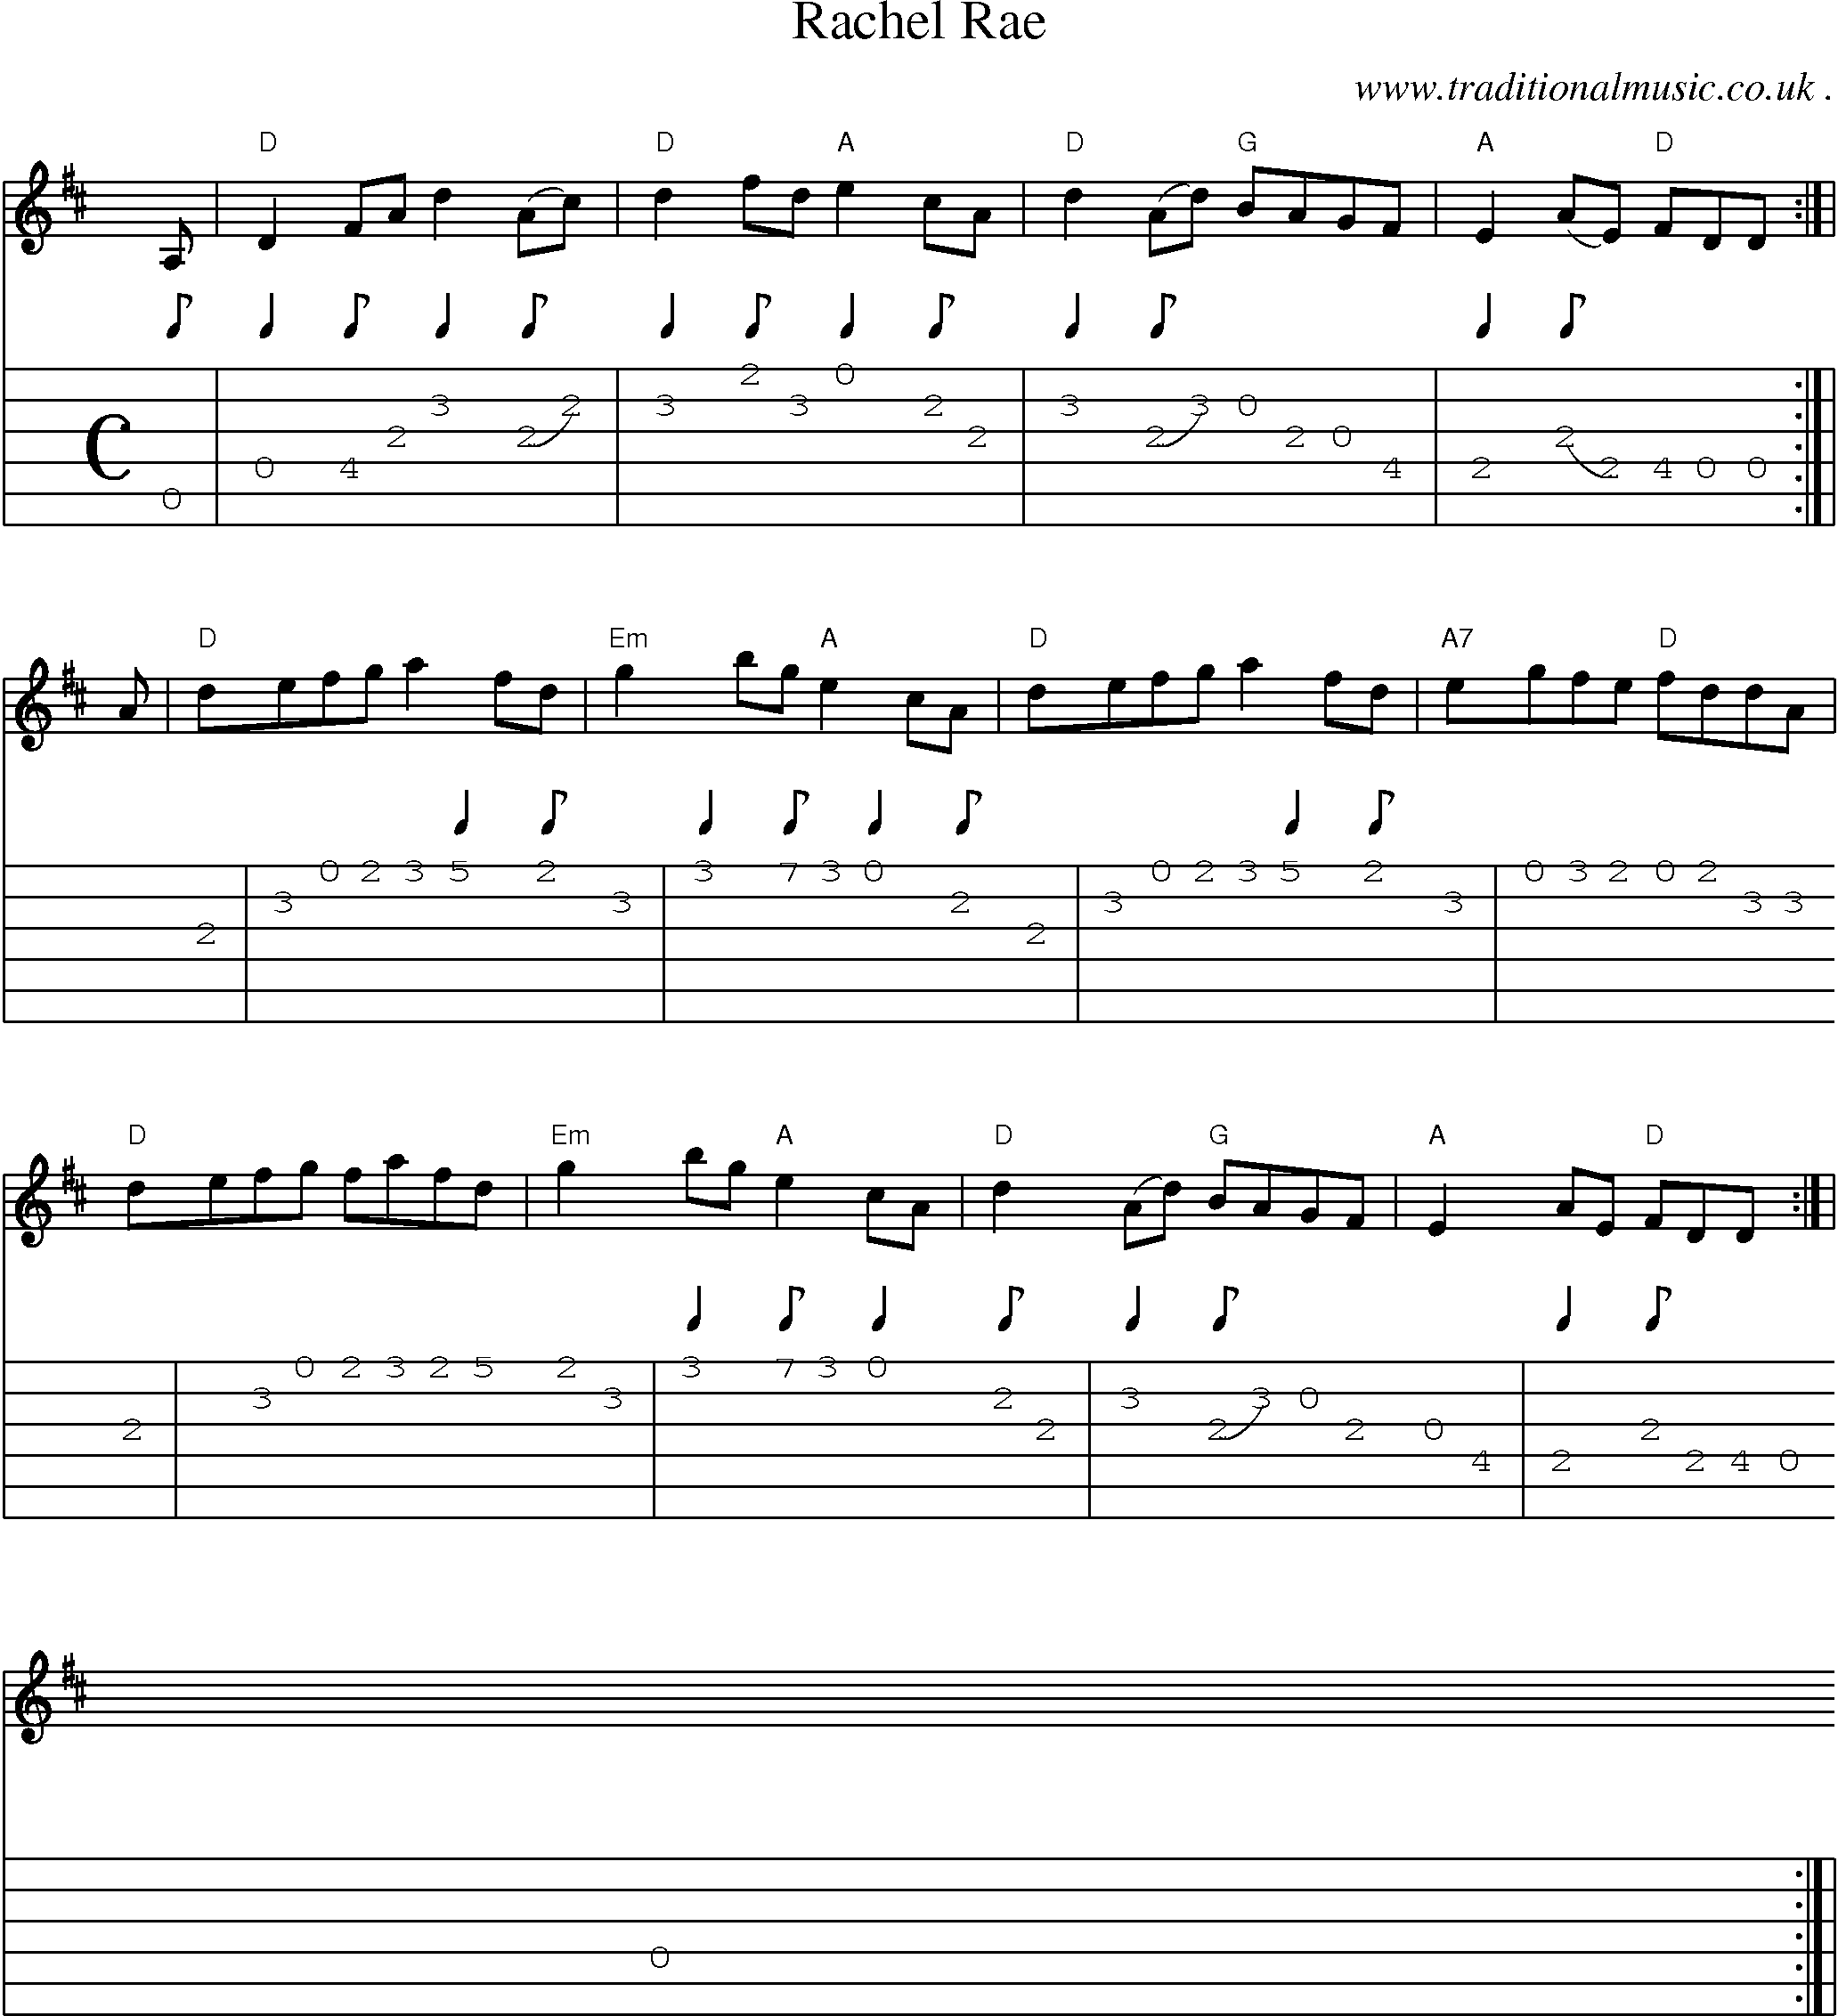 Sheet-music  score, Chords and Guitar Tabs for Rachel Rae